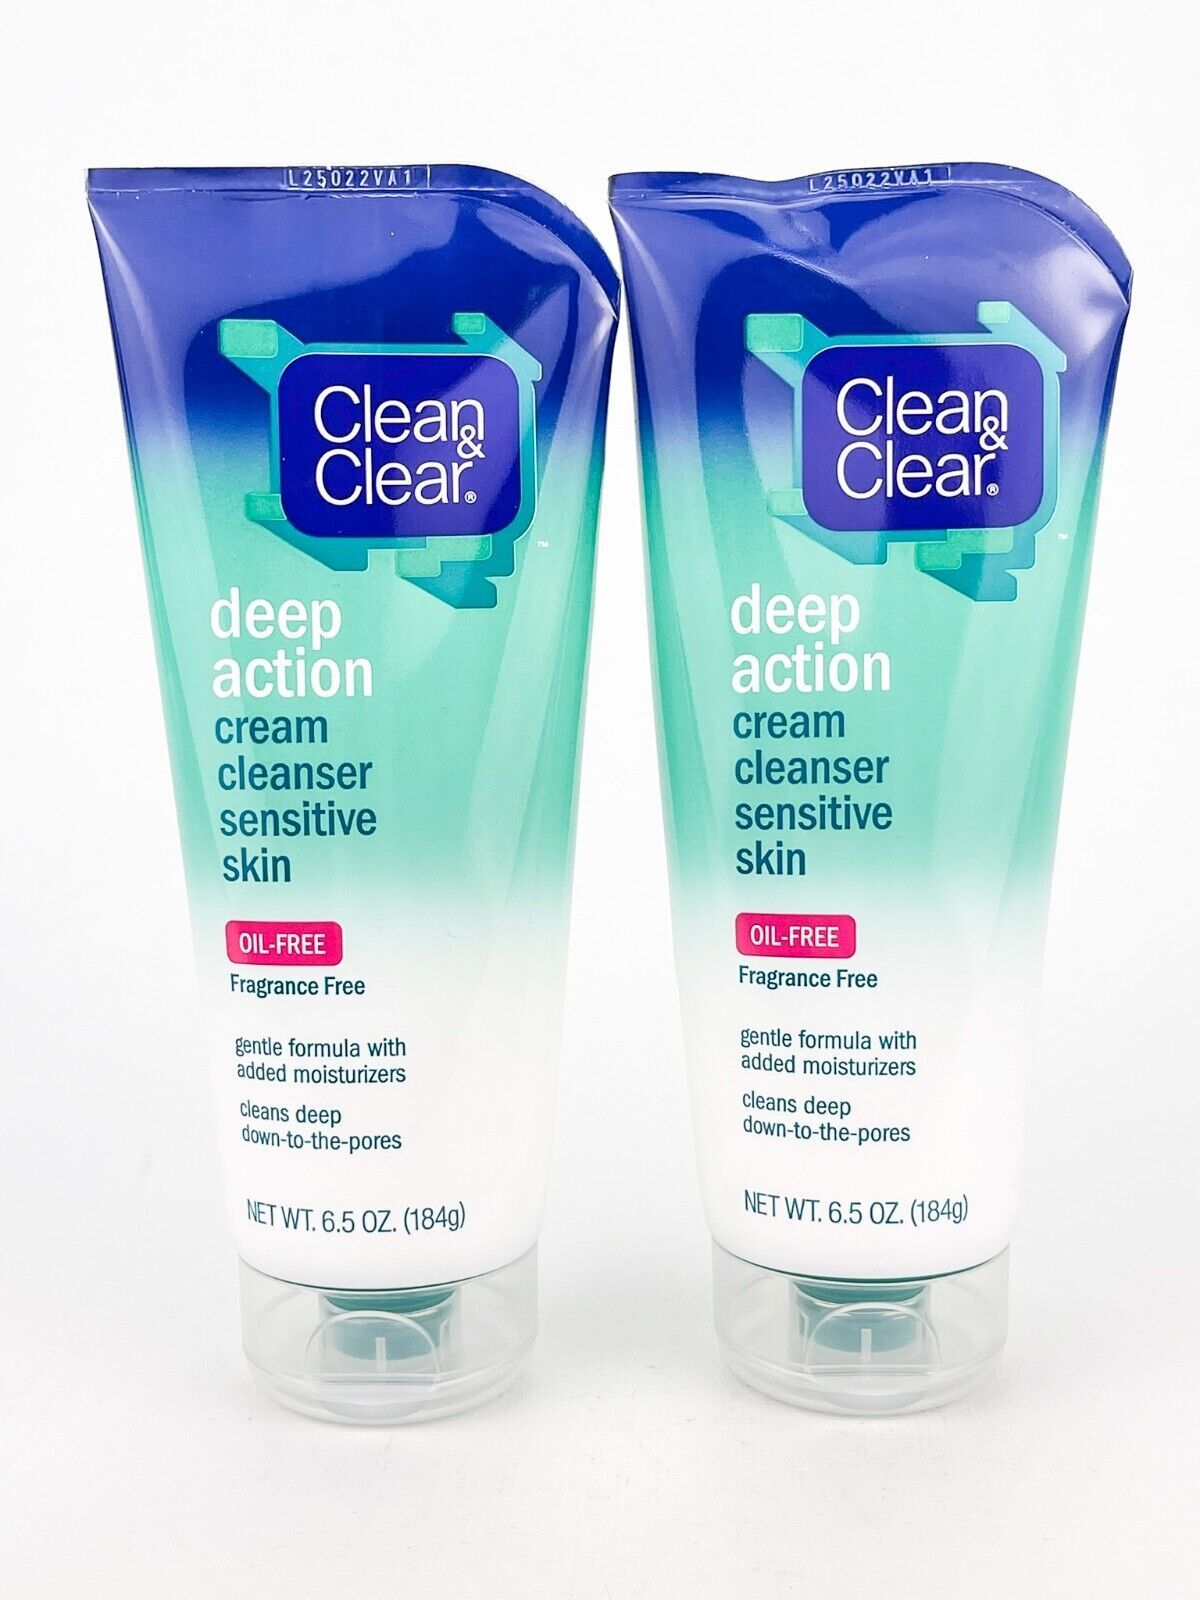 Clean Clear Deep Action Oil Free Sensitive Skin Cream Cleanser 6.5oz Lot of 2 - $22.20